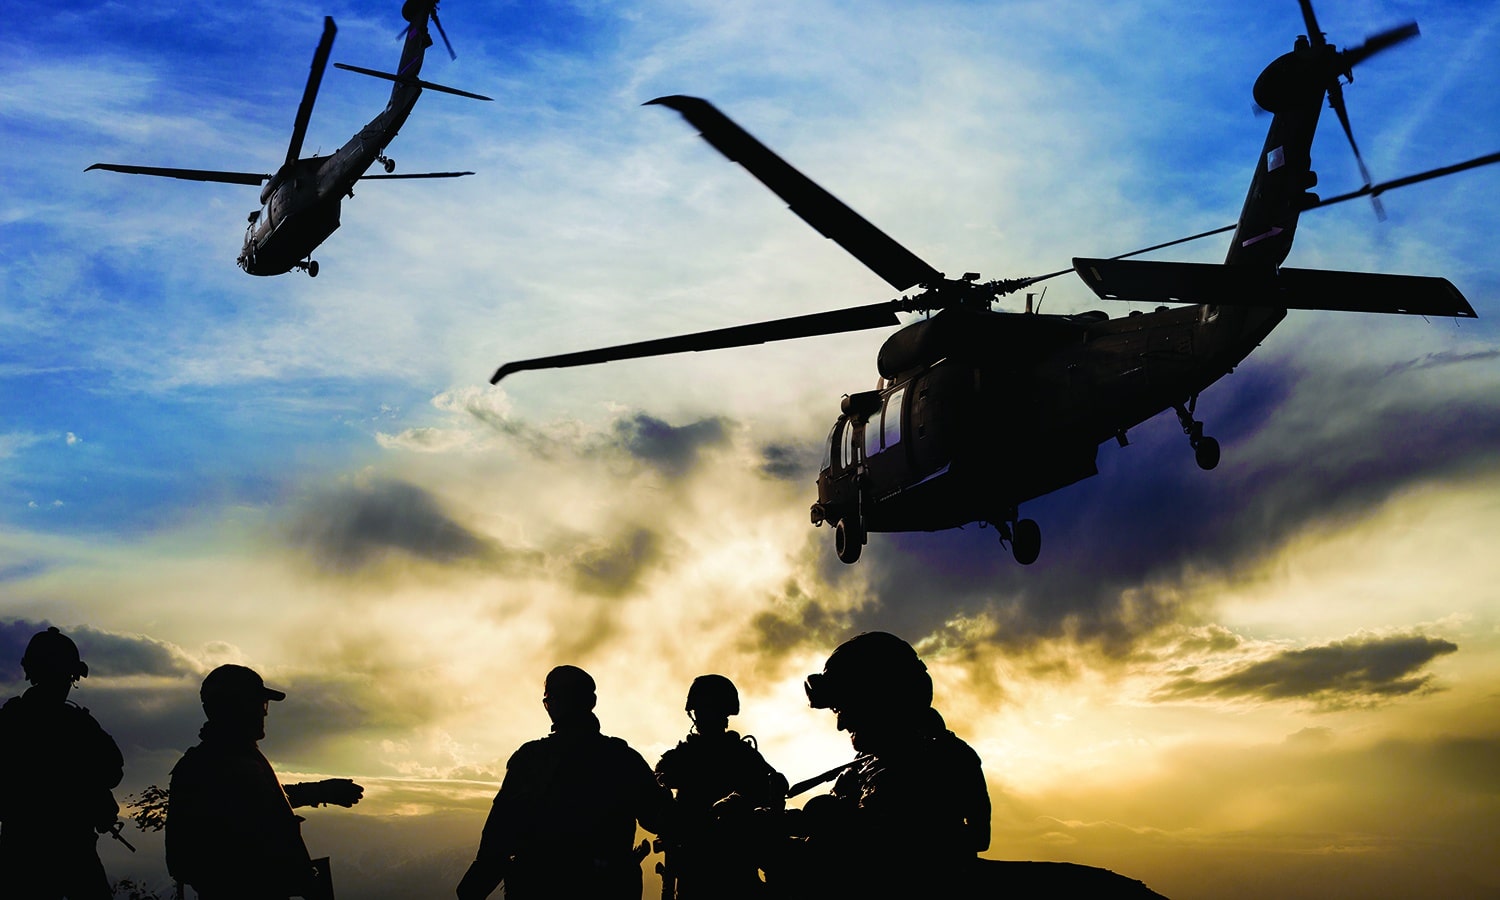 Reaching the Next Generation of Disciplemakers in the Marine Corps | The Navigators Military | Silhouettes of soldiers during Military Mission at dusk